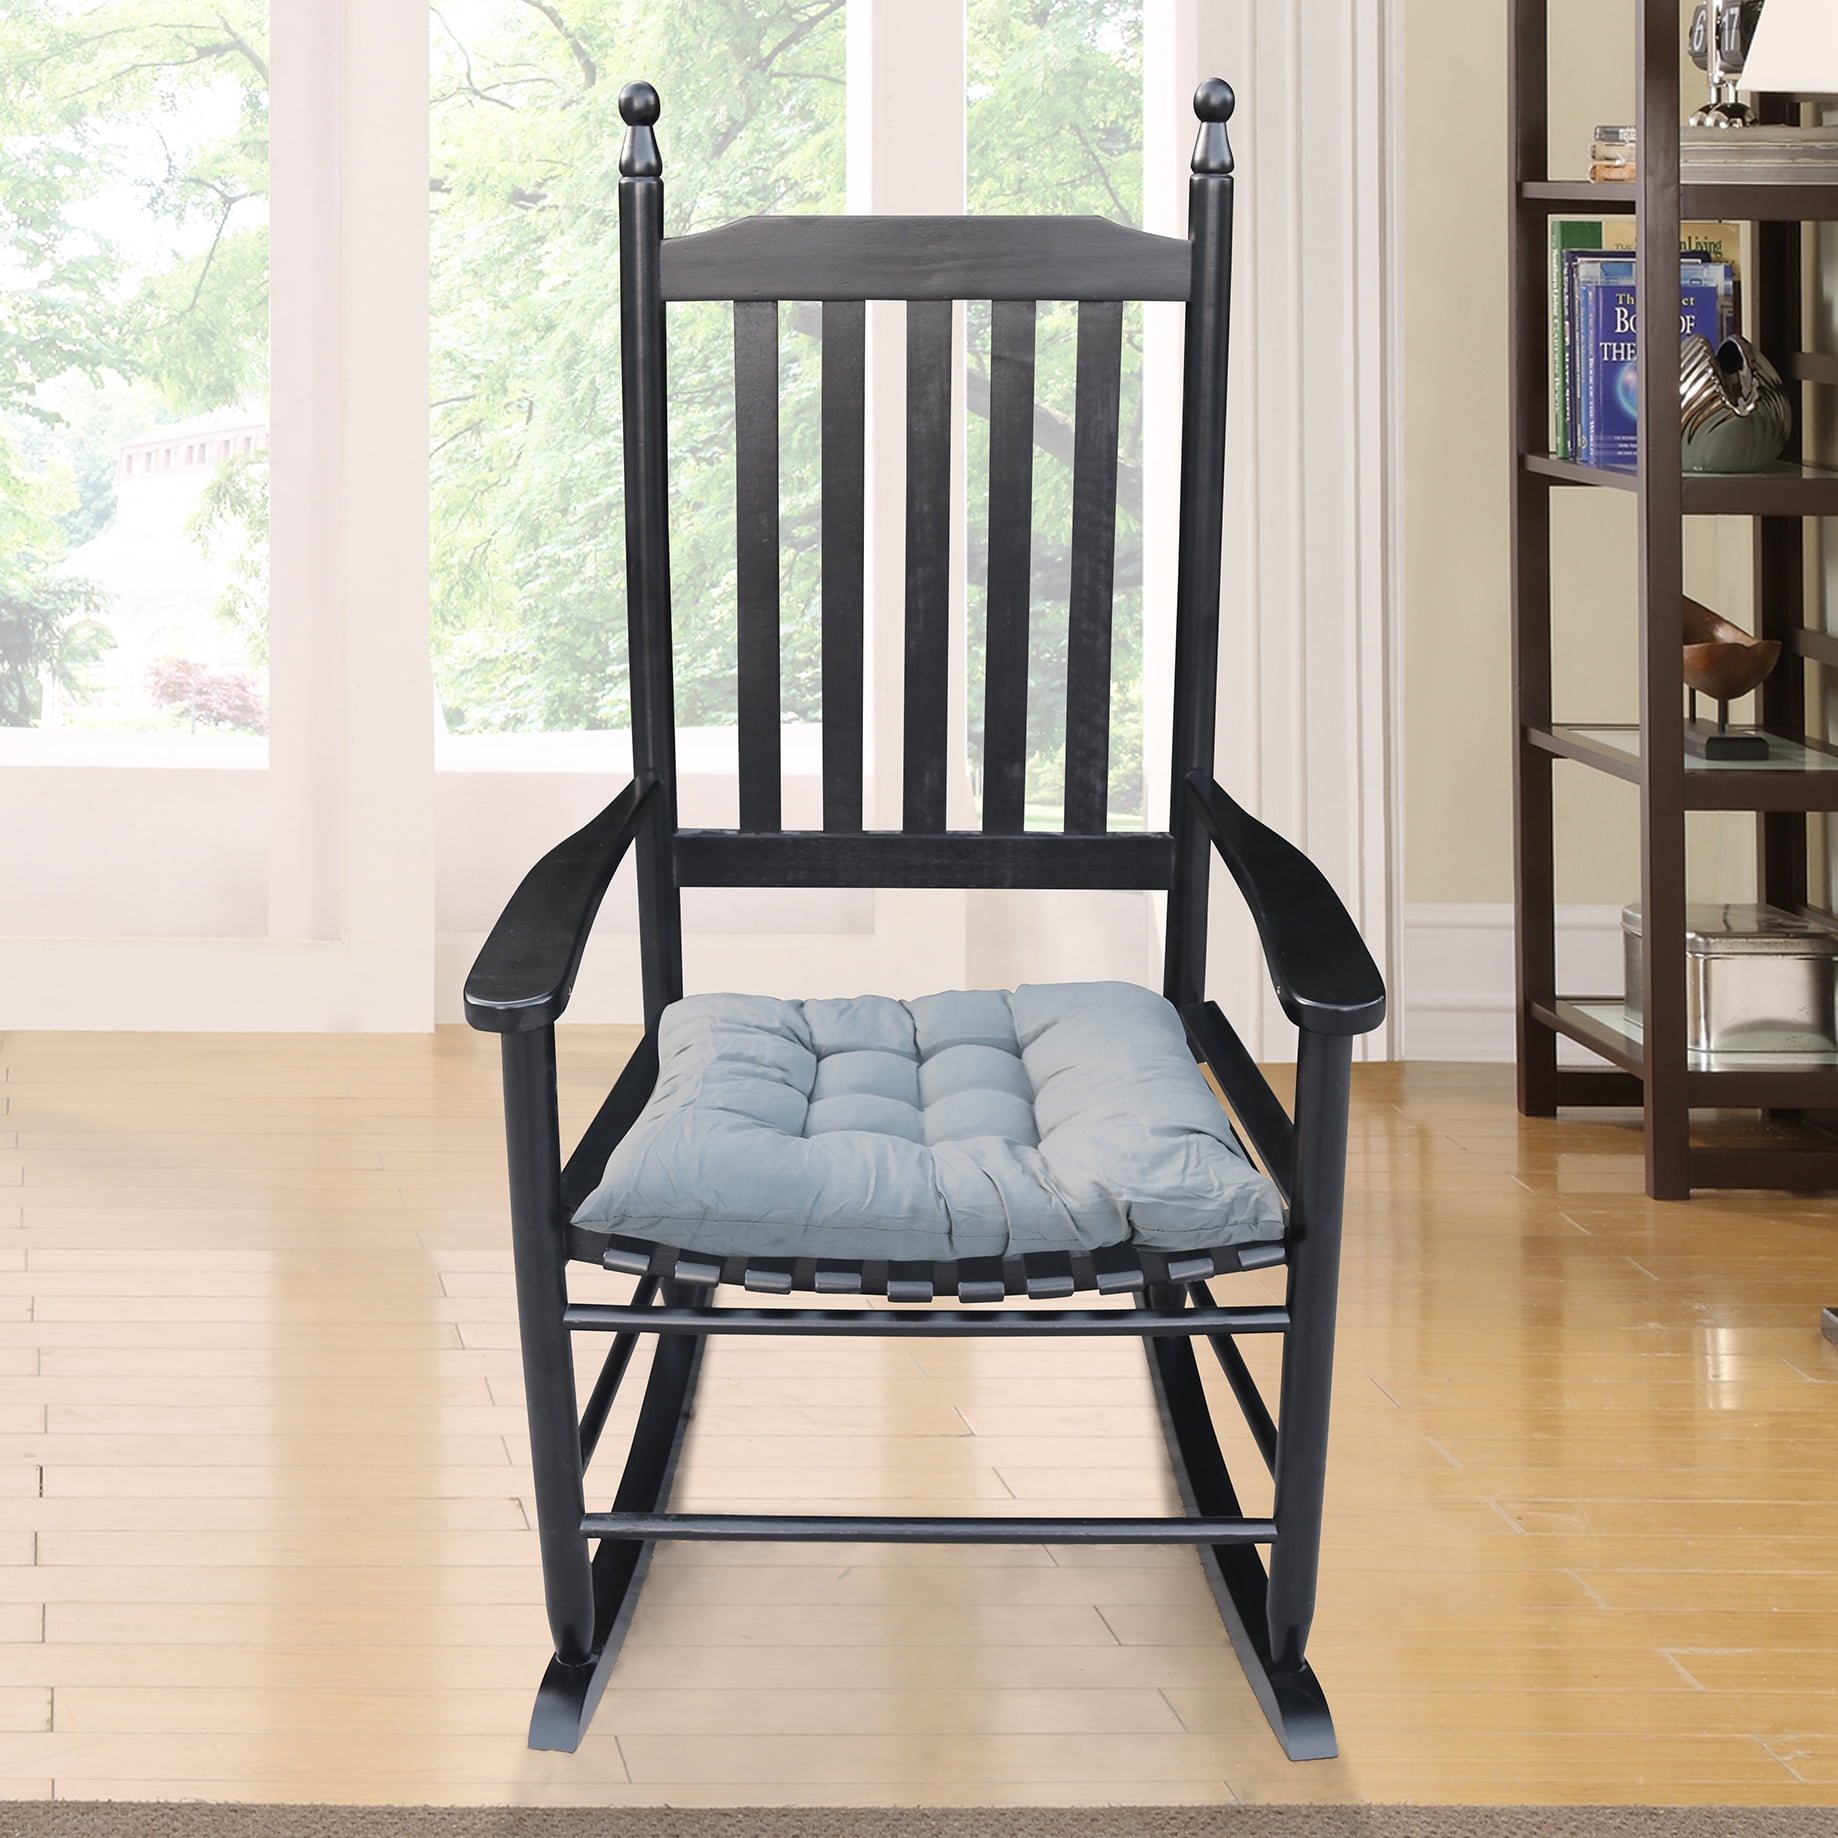 Porch Rocker Chair, Sturdy & Durable Wooden Rocking Chair with Seat